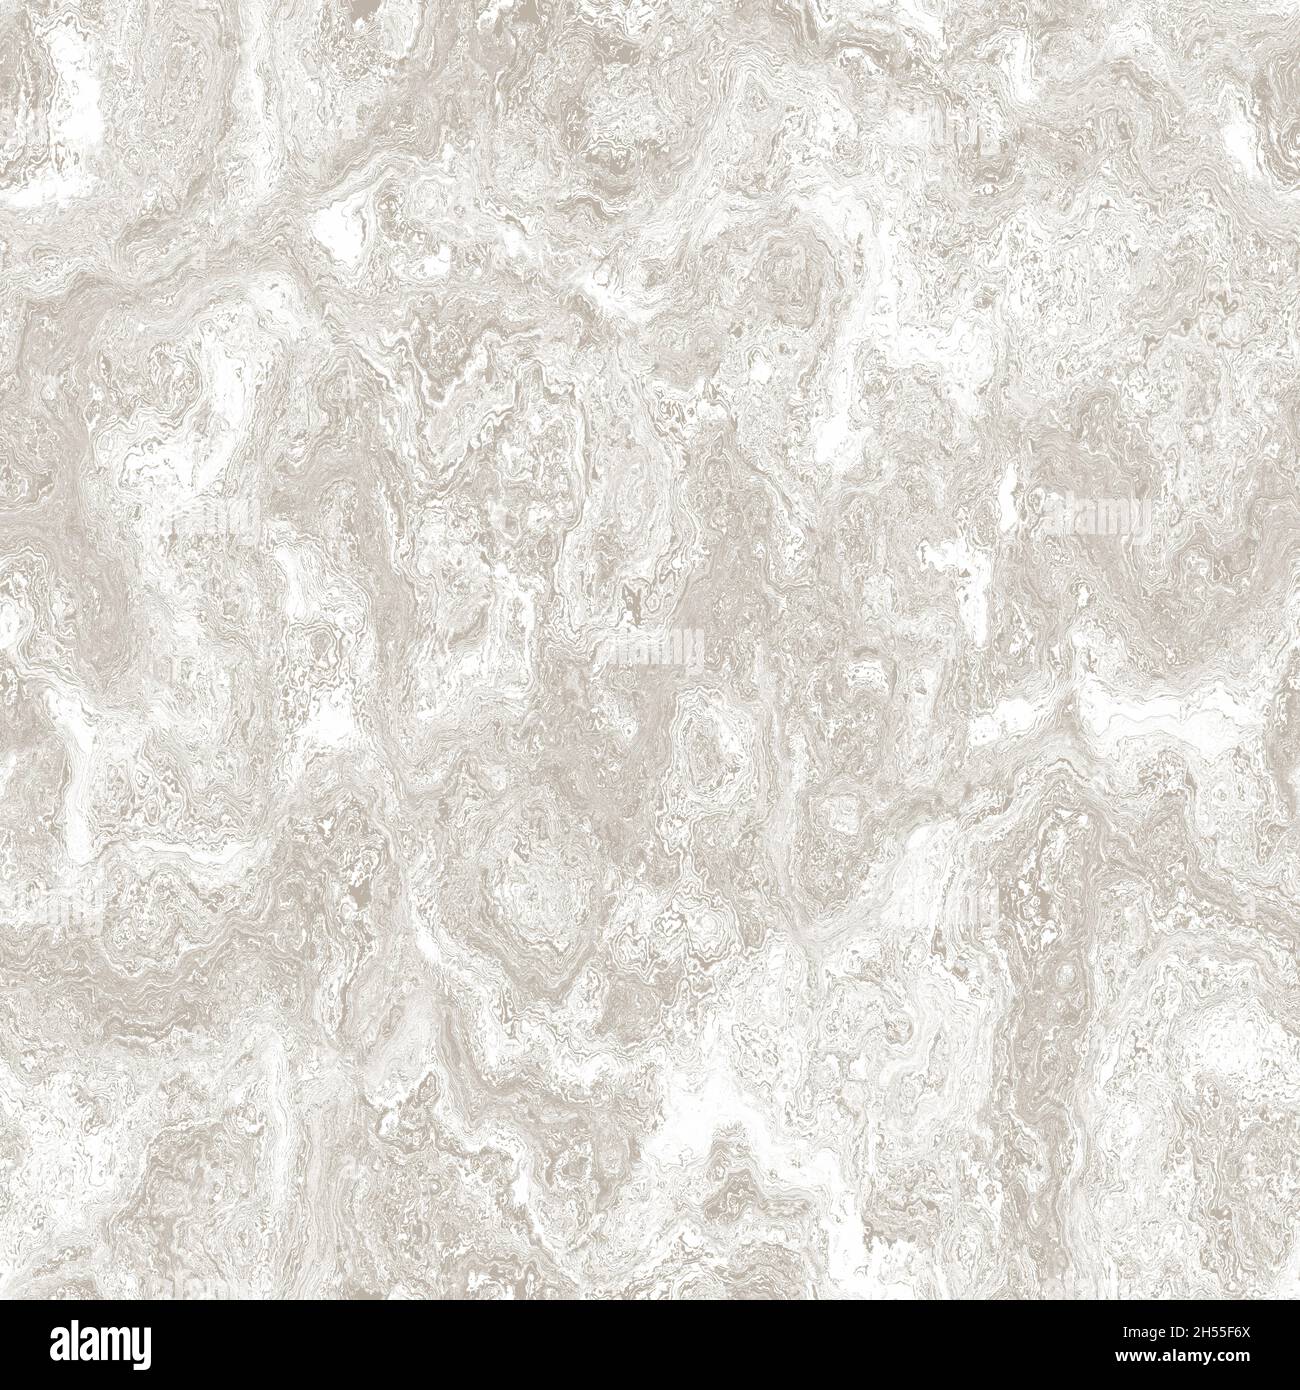 Premium Photo  Surface of the white stone texture rough graywhite tone use  this for wallpaper or background image there is a blank space for textx9